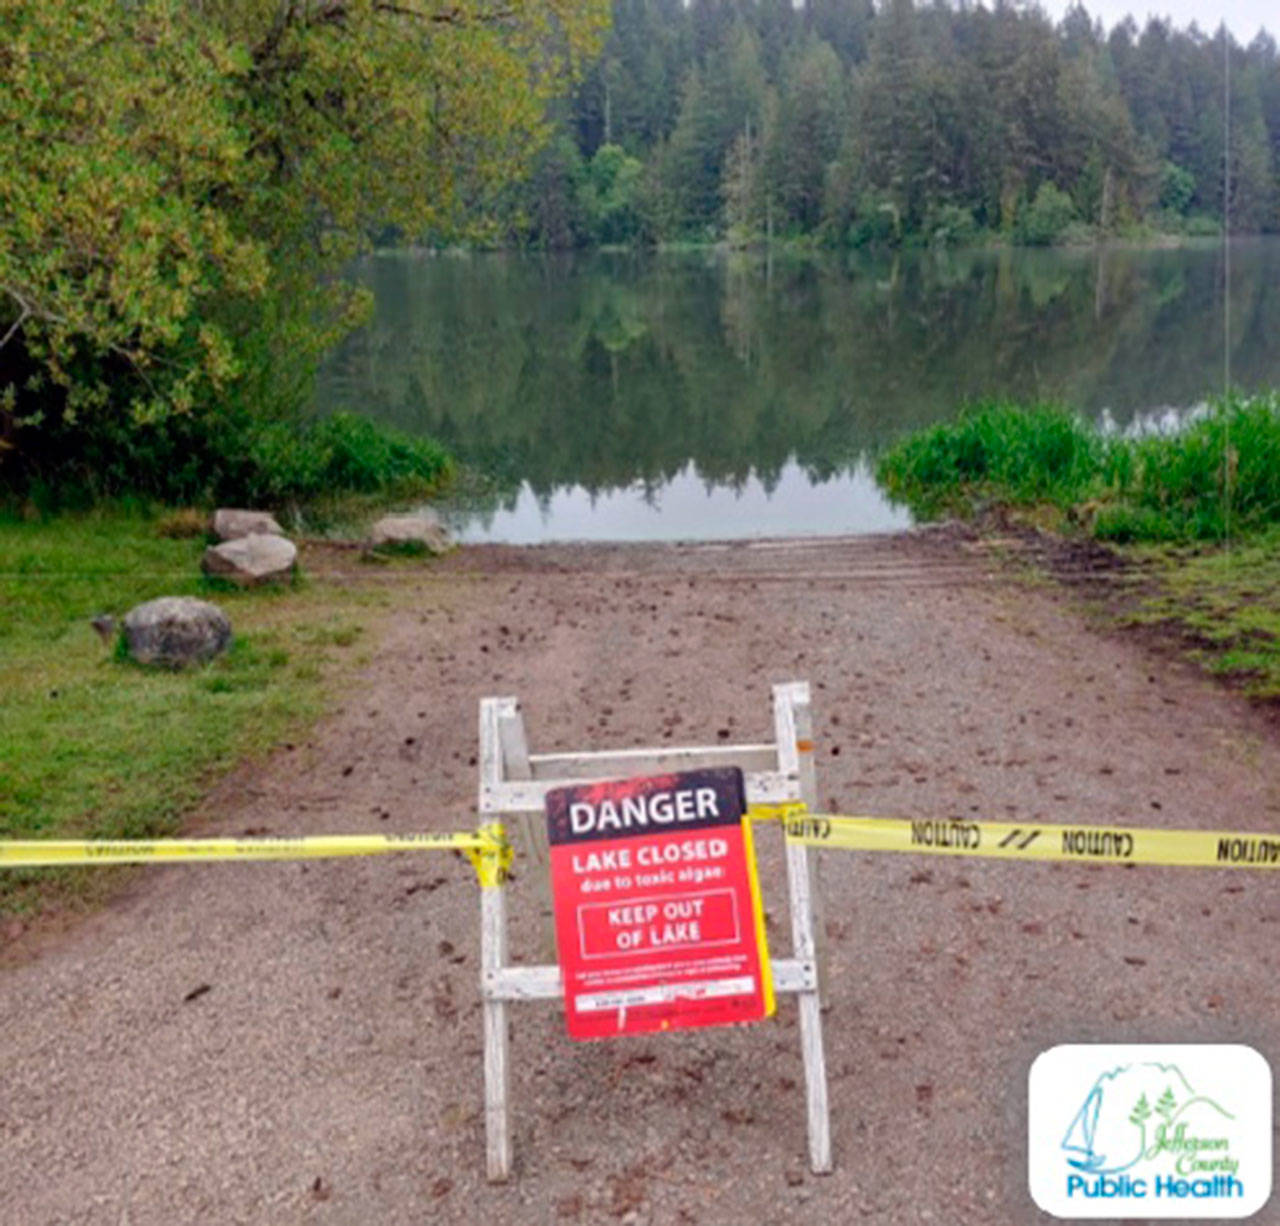 Anderson Lake is closed to fishing and other recreation because of high levels of anatoxin-a, a potent nerve poison.